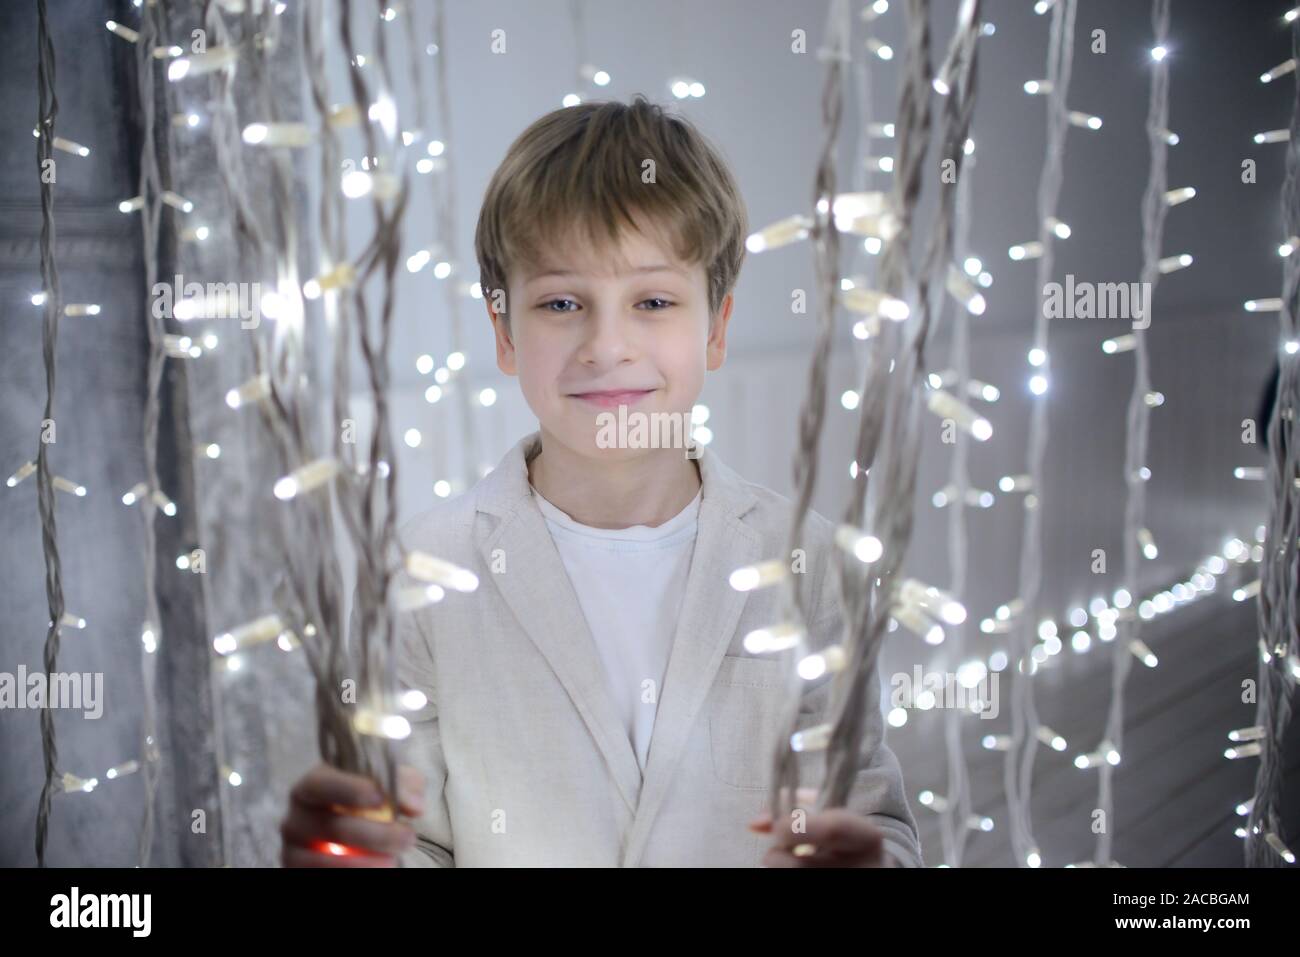 Smiling boy holding Bright Christmas garlands Stock Photo